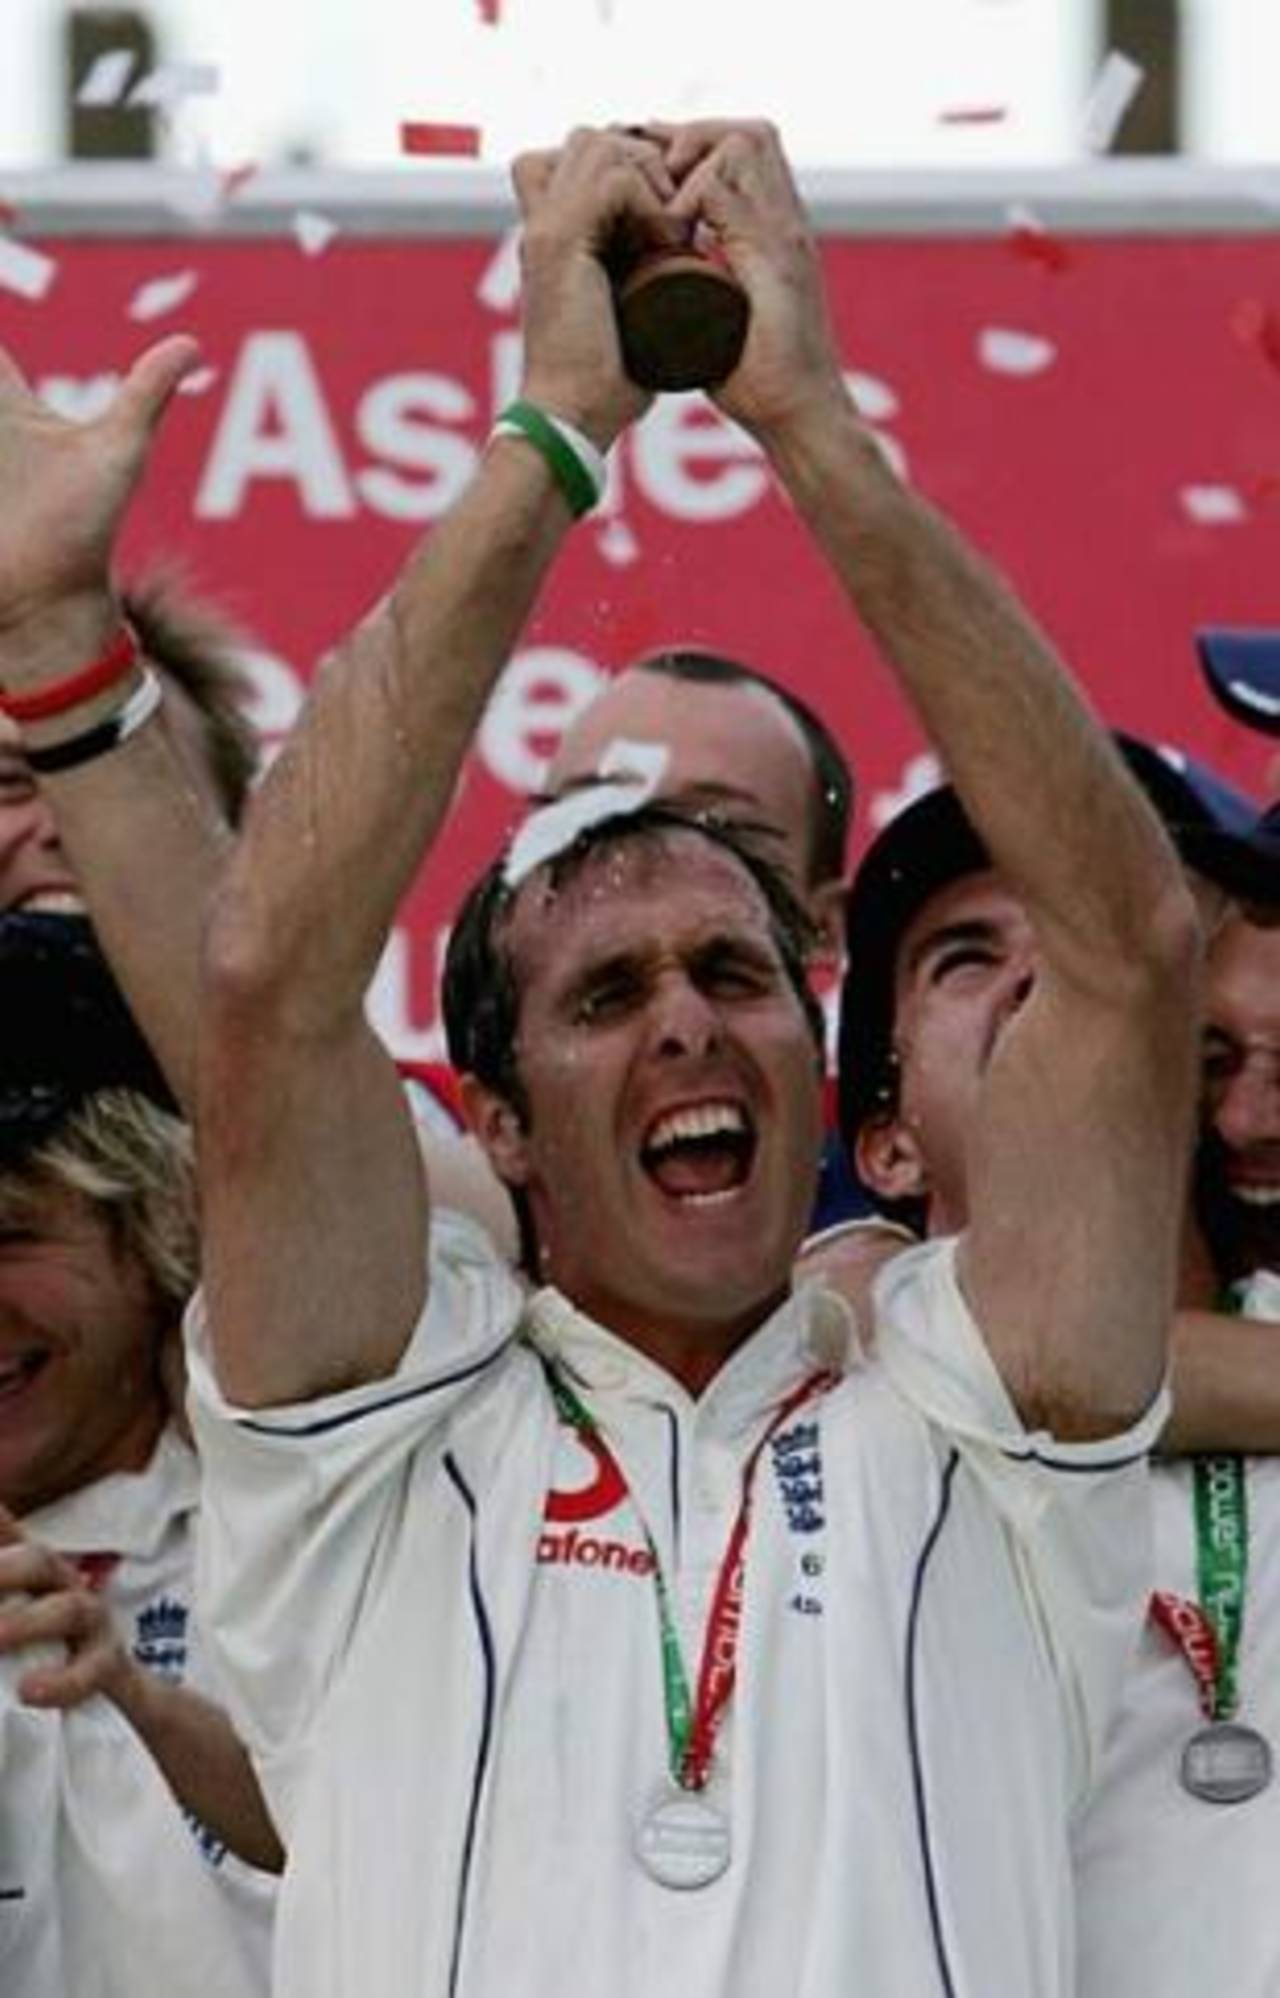 After 16 years and 29 days in Australians hands, an ecstatic Michael Vaughan lifts the Ashes, England v Australia, The Oval, September 12, 2005